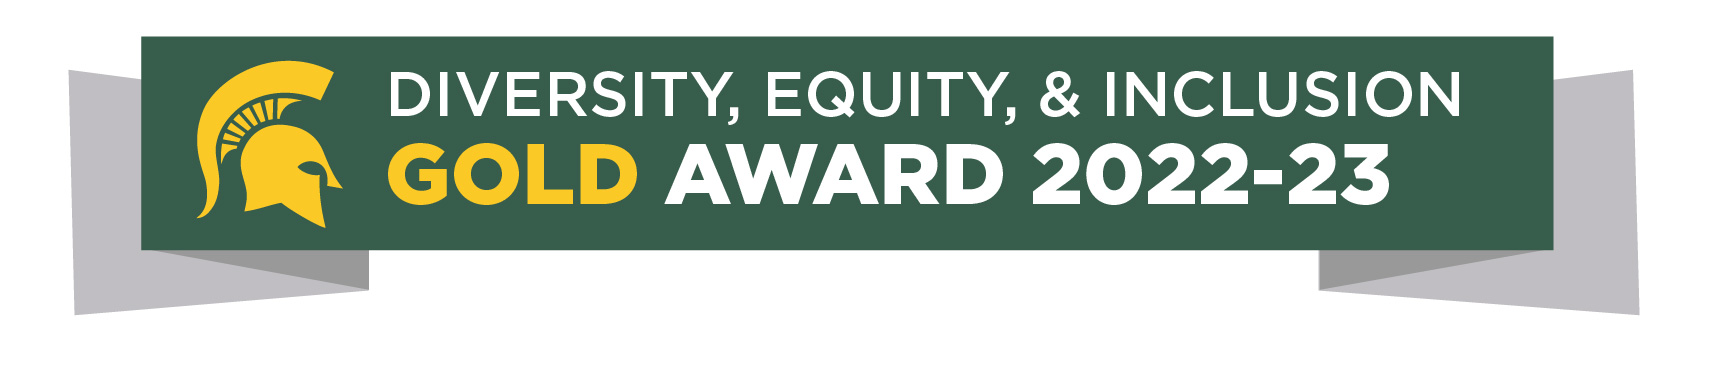 Diversity, Equity & Inclusion Gold Award 2022-23 with Spartan helmet